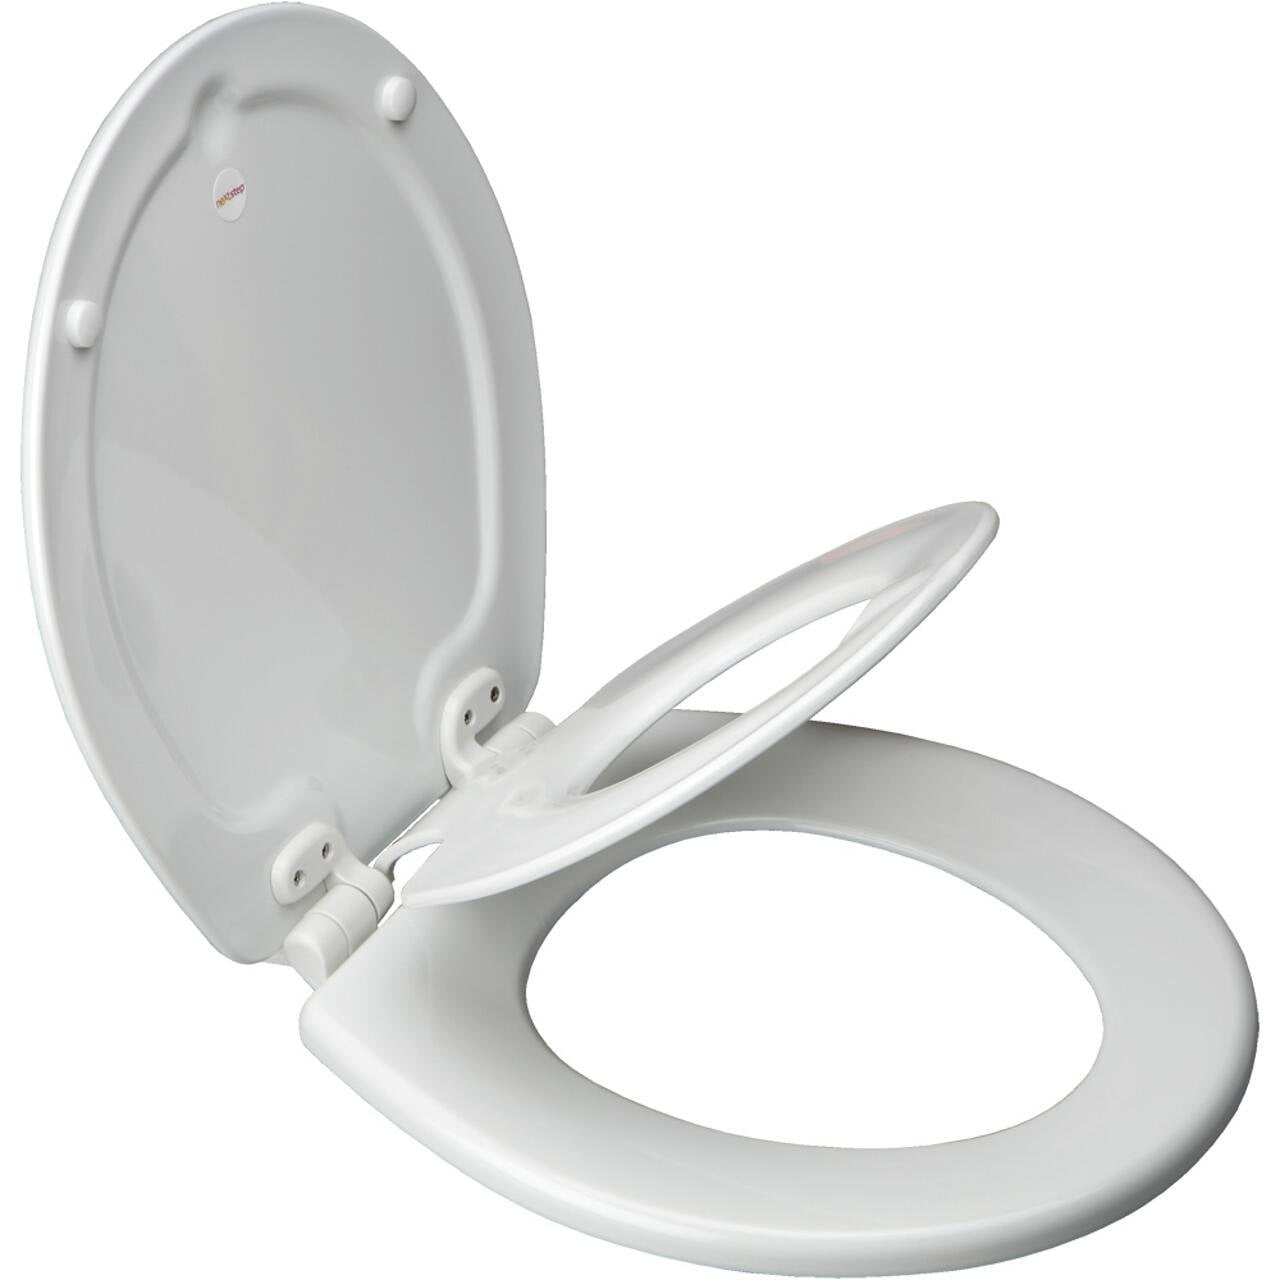 iTouchless Touch-Free Sensor Controlled Automatic Toilet Seat Round Model Off-White